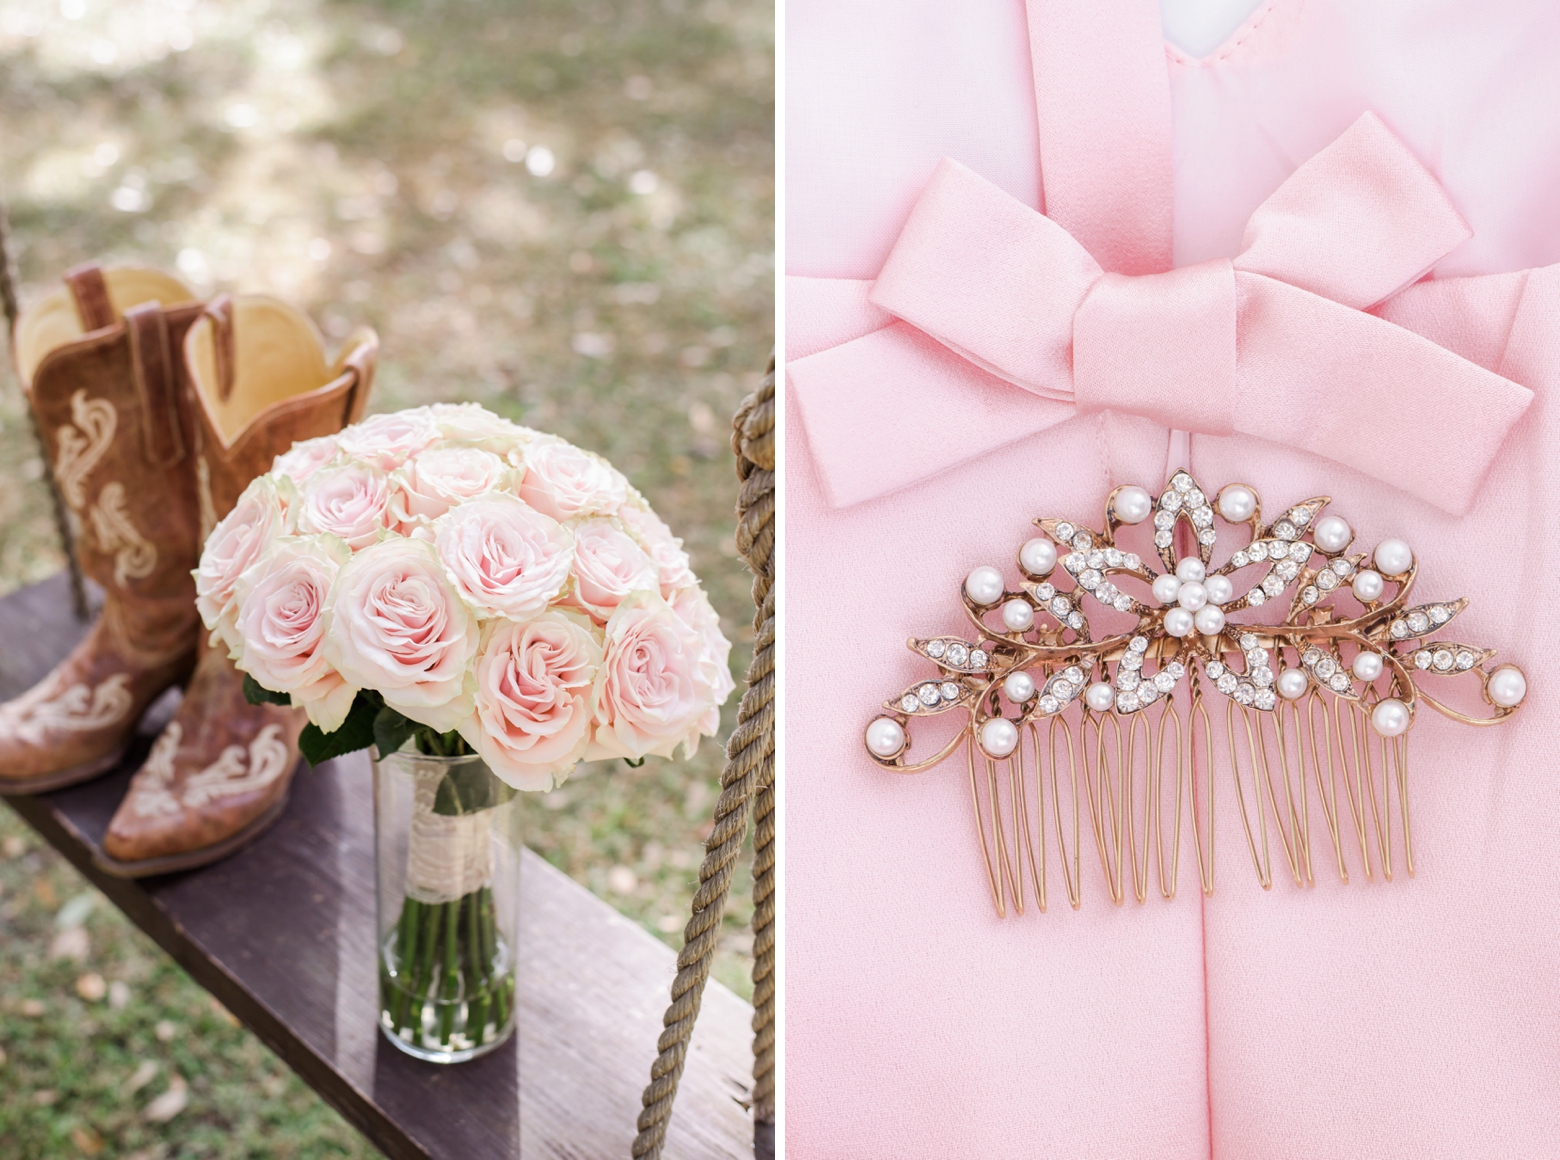 Bridal details of a hair pin and cowboy boots with rose filled flower bouquets